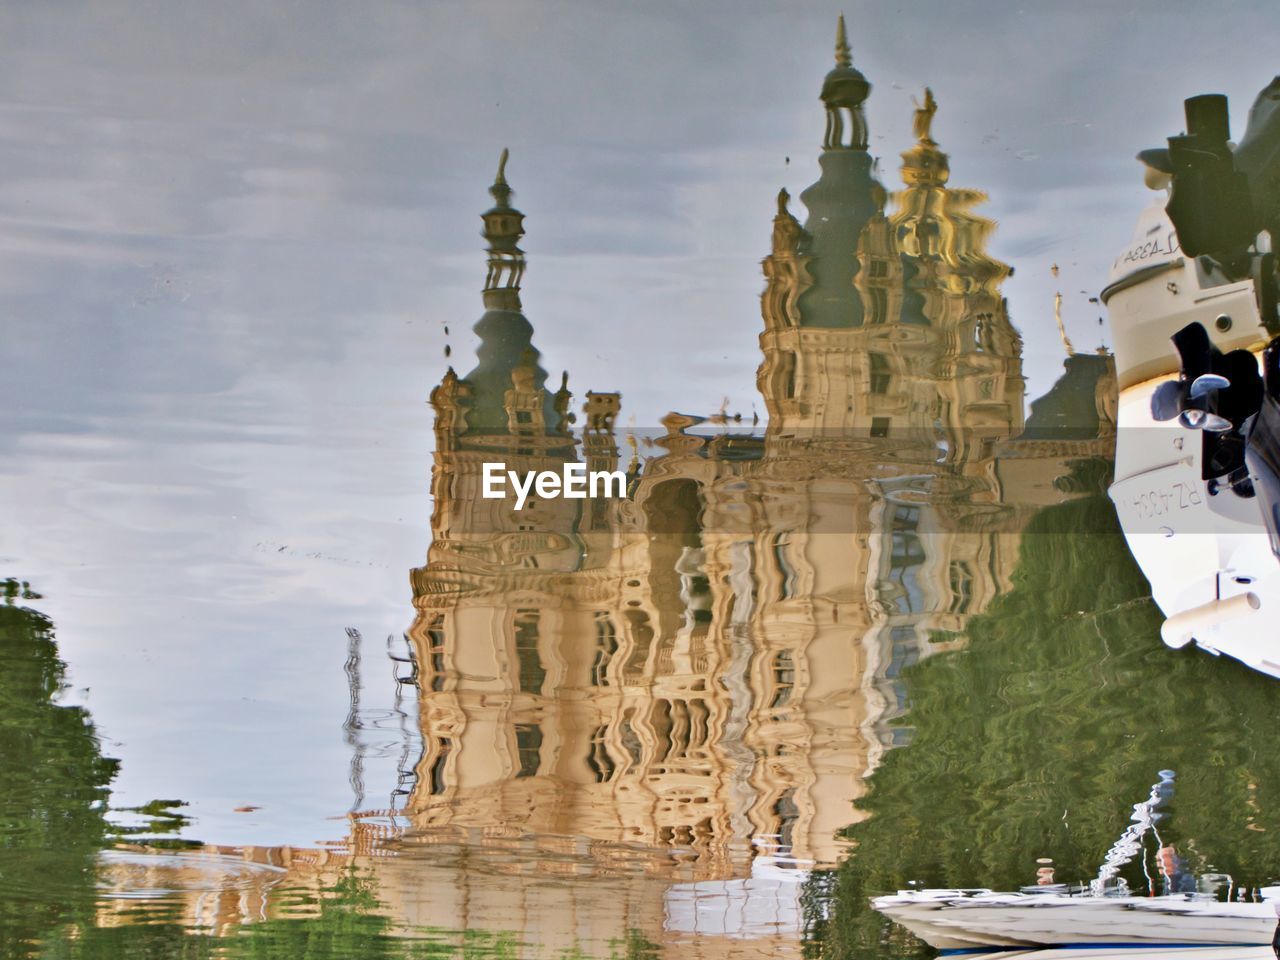 Mirror image of castle in the water